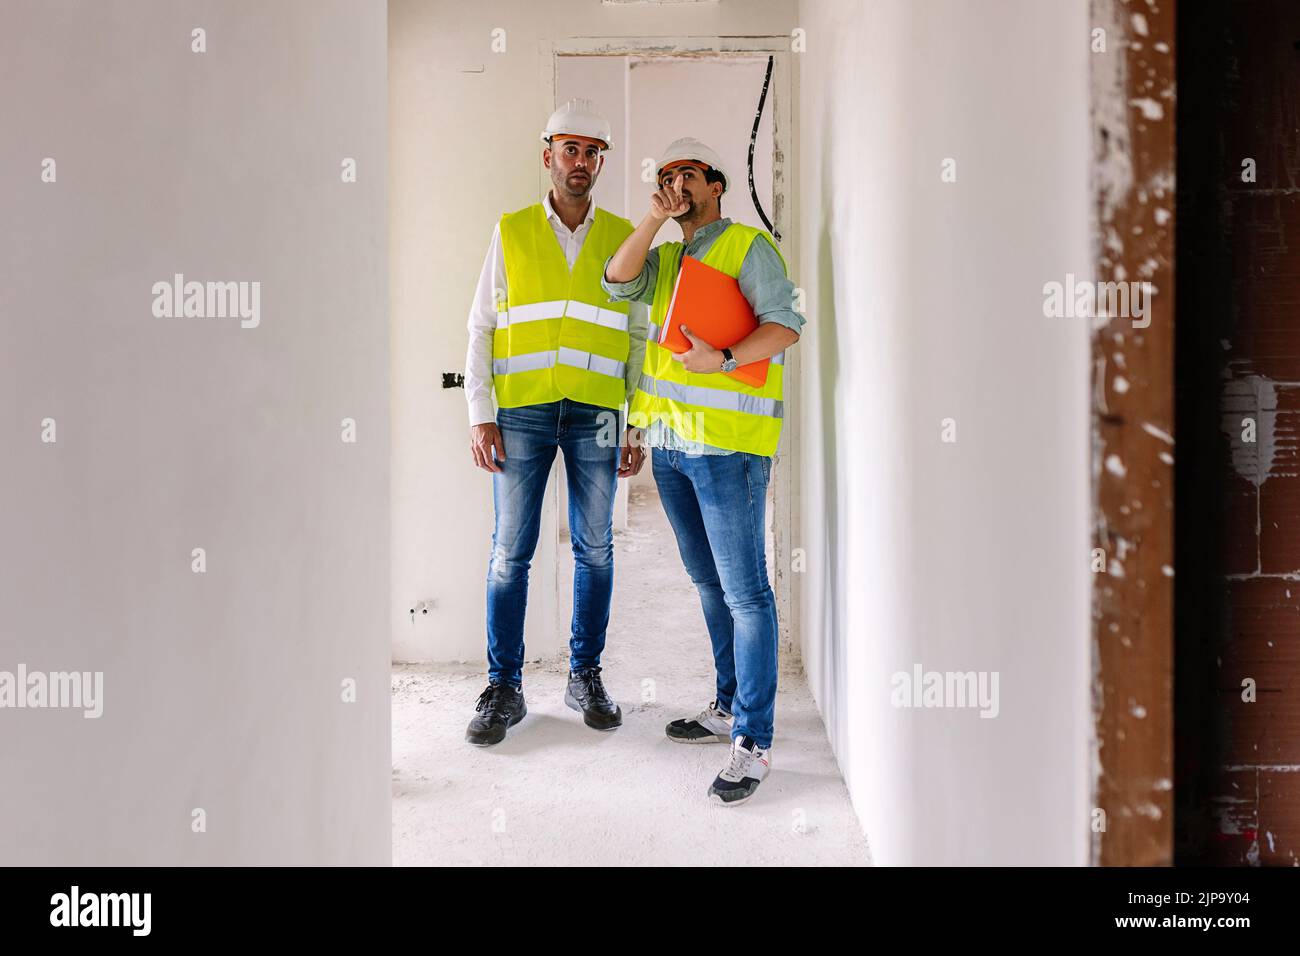 Professional engineer architect workers in conversation at construction site Stock Photo